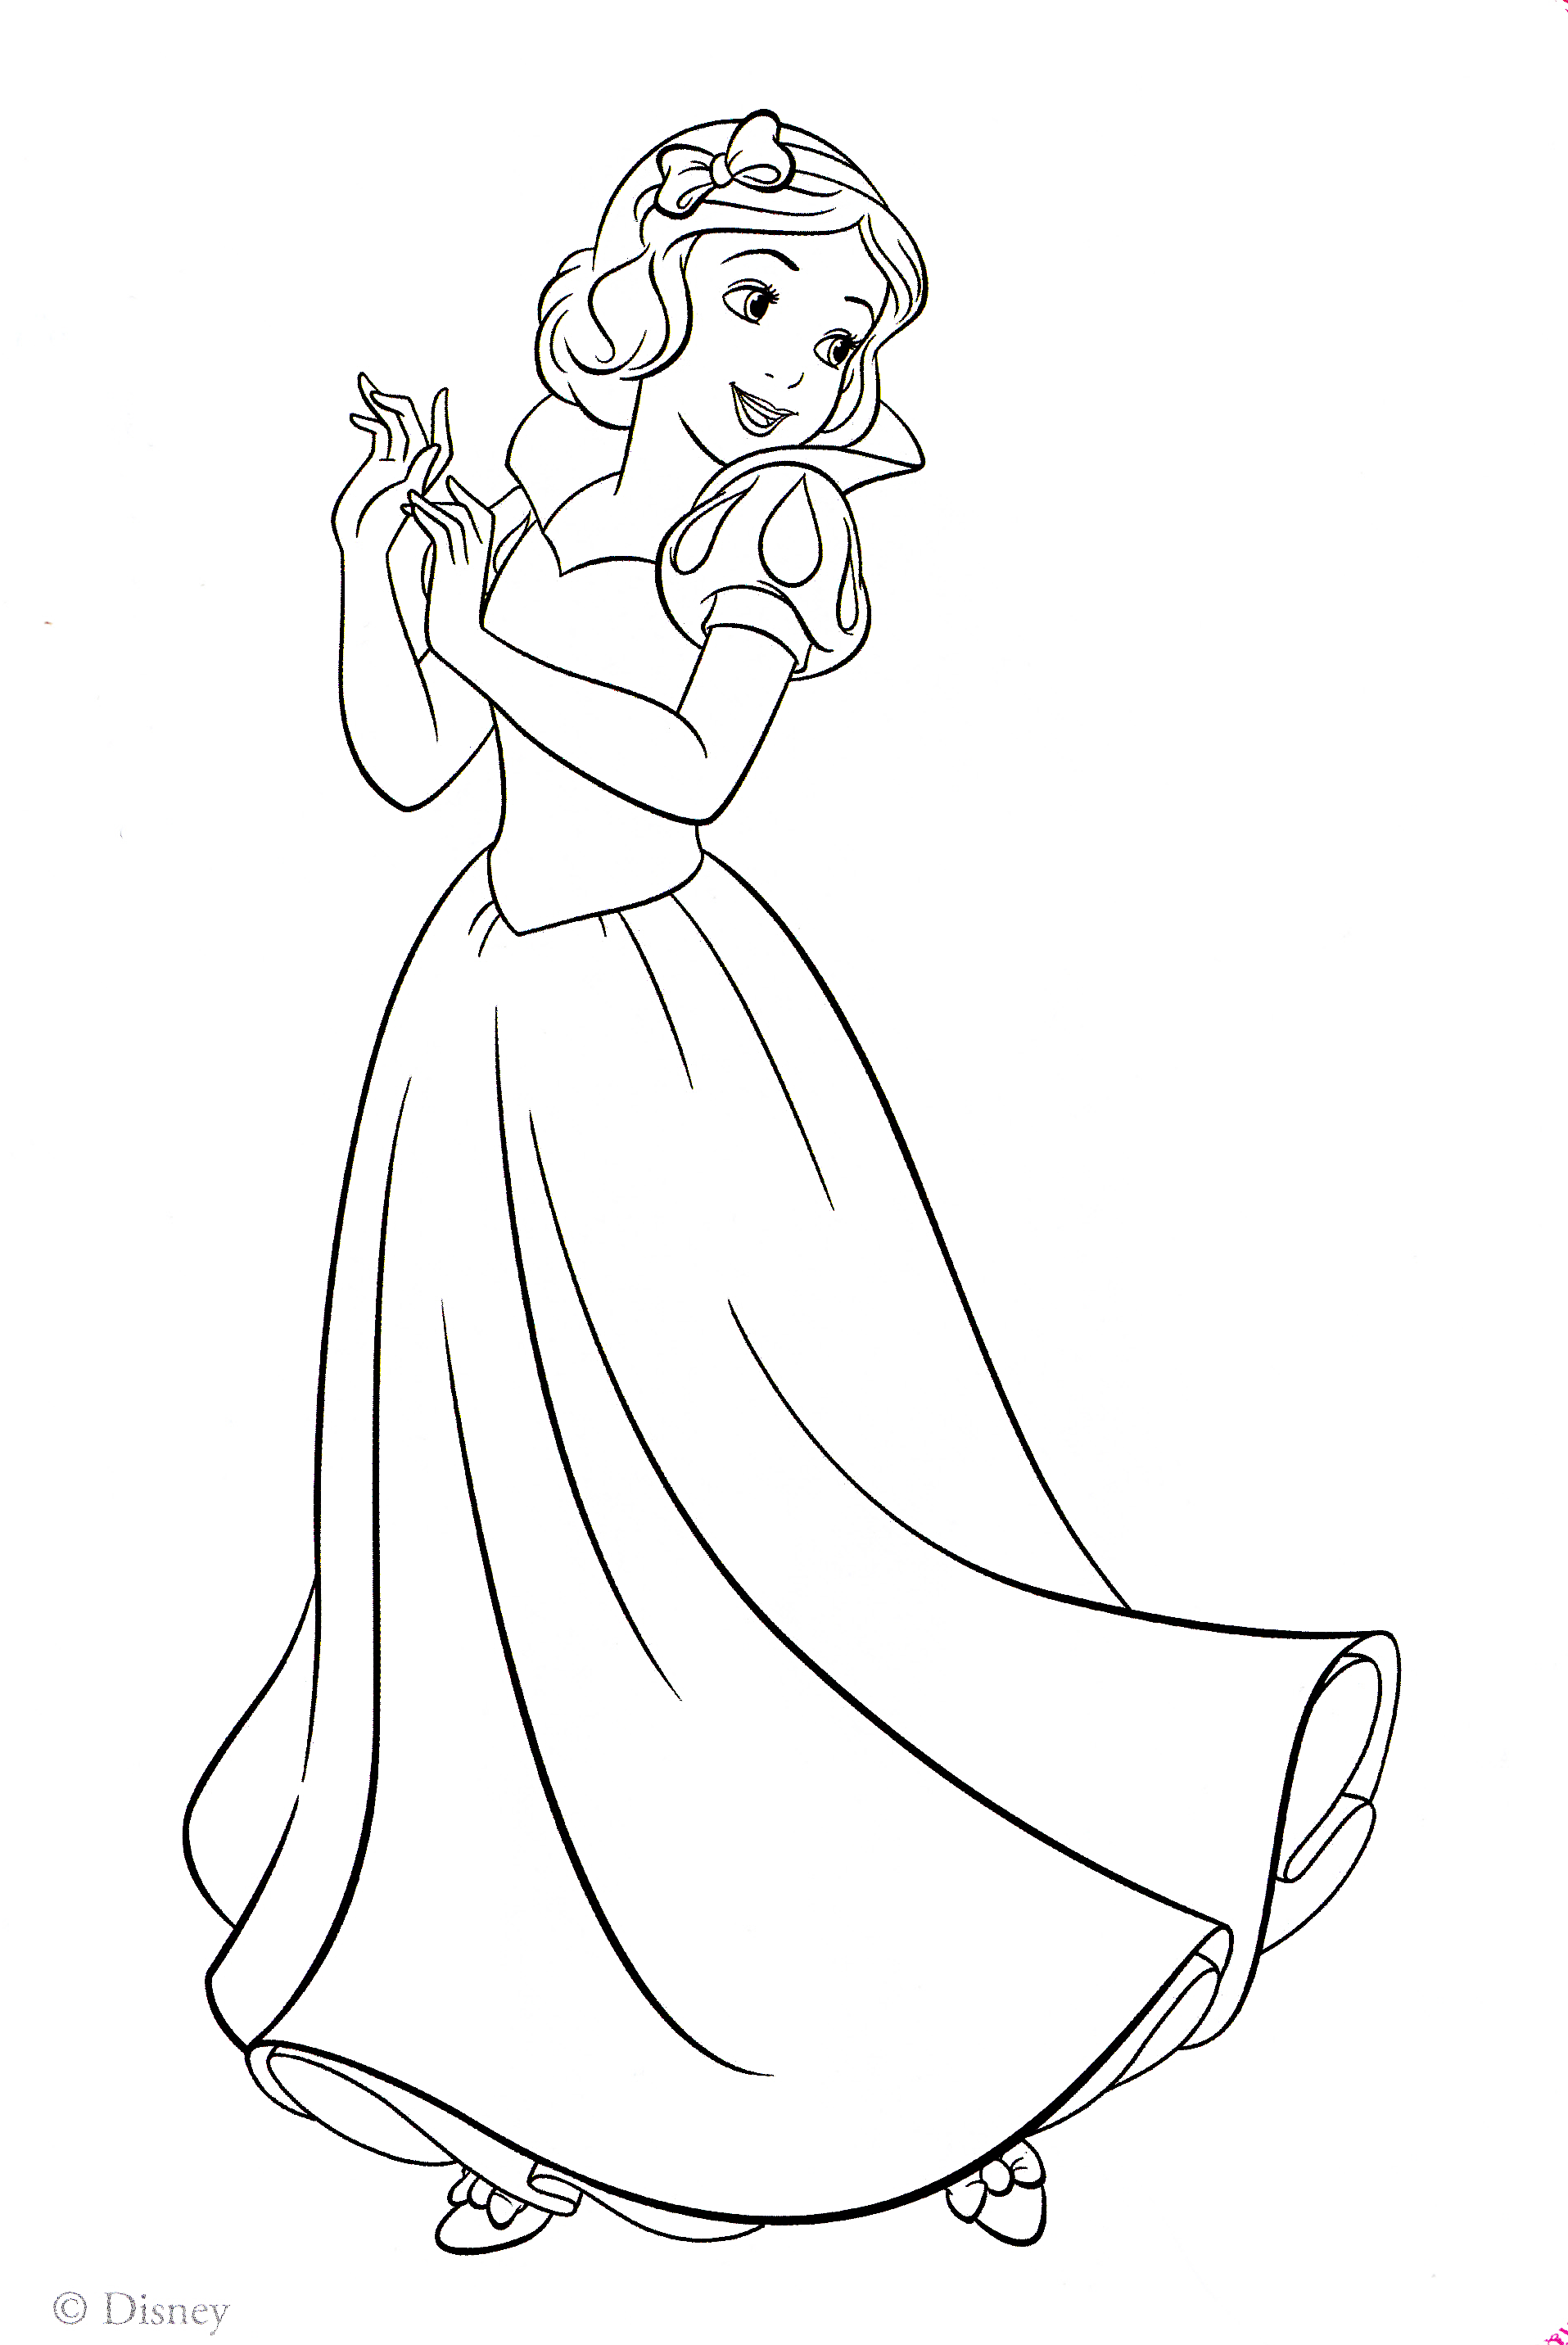 Disney Princess Coloring Pages Snow White - High Quality Coloring ...